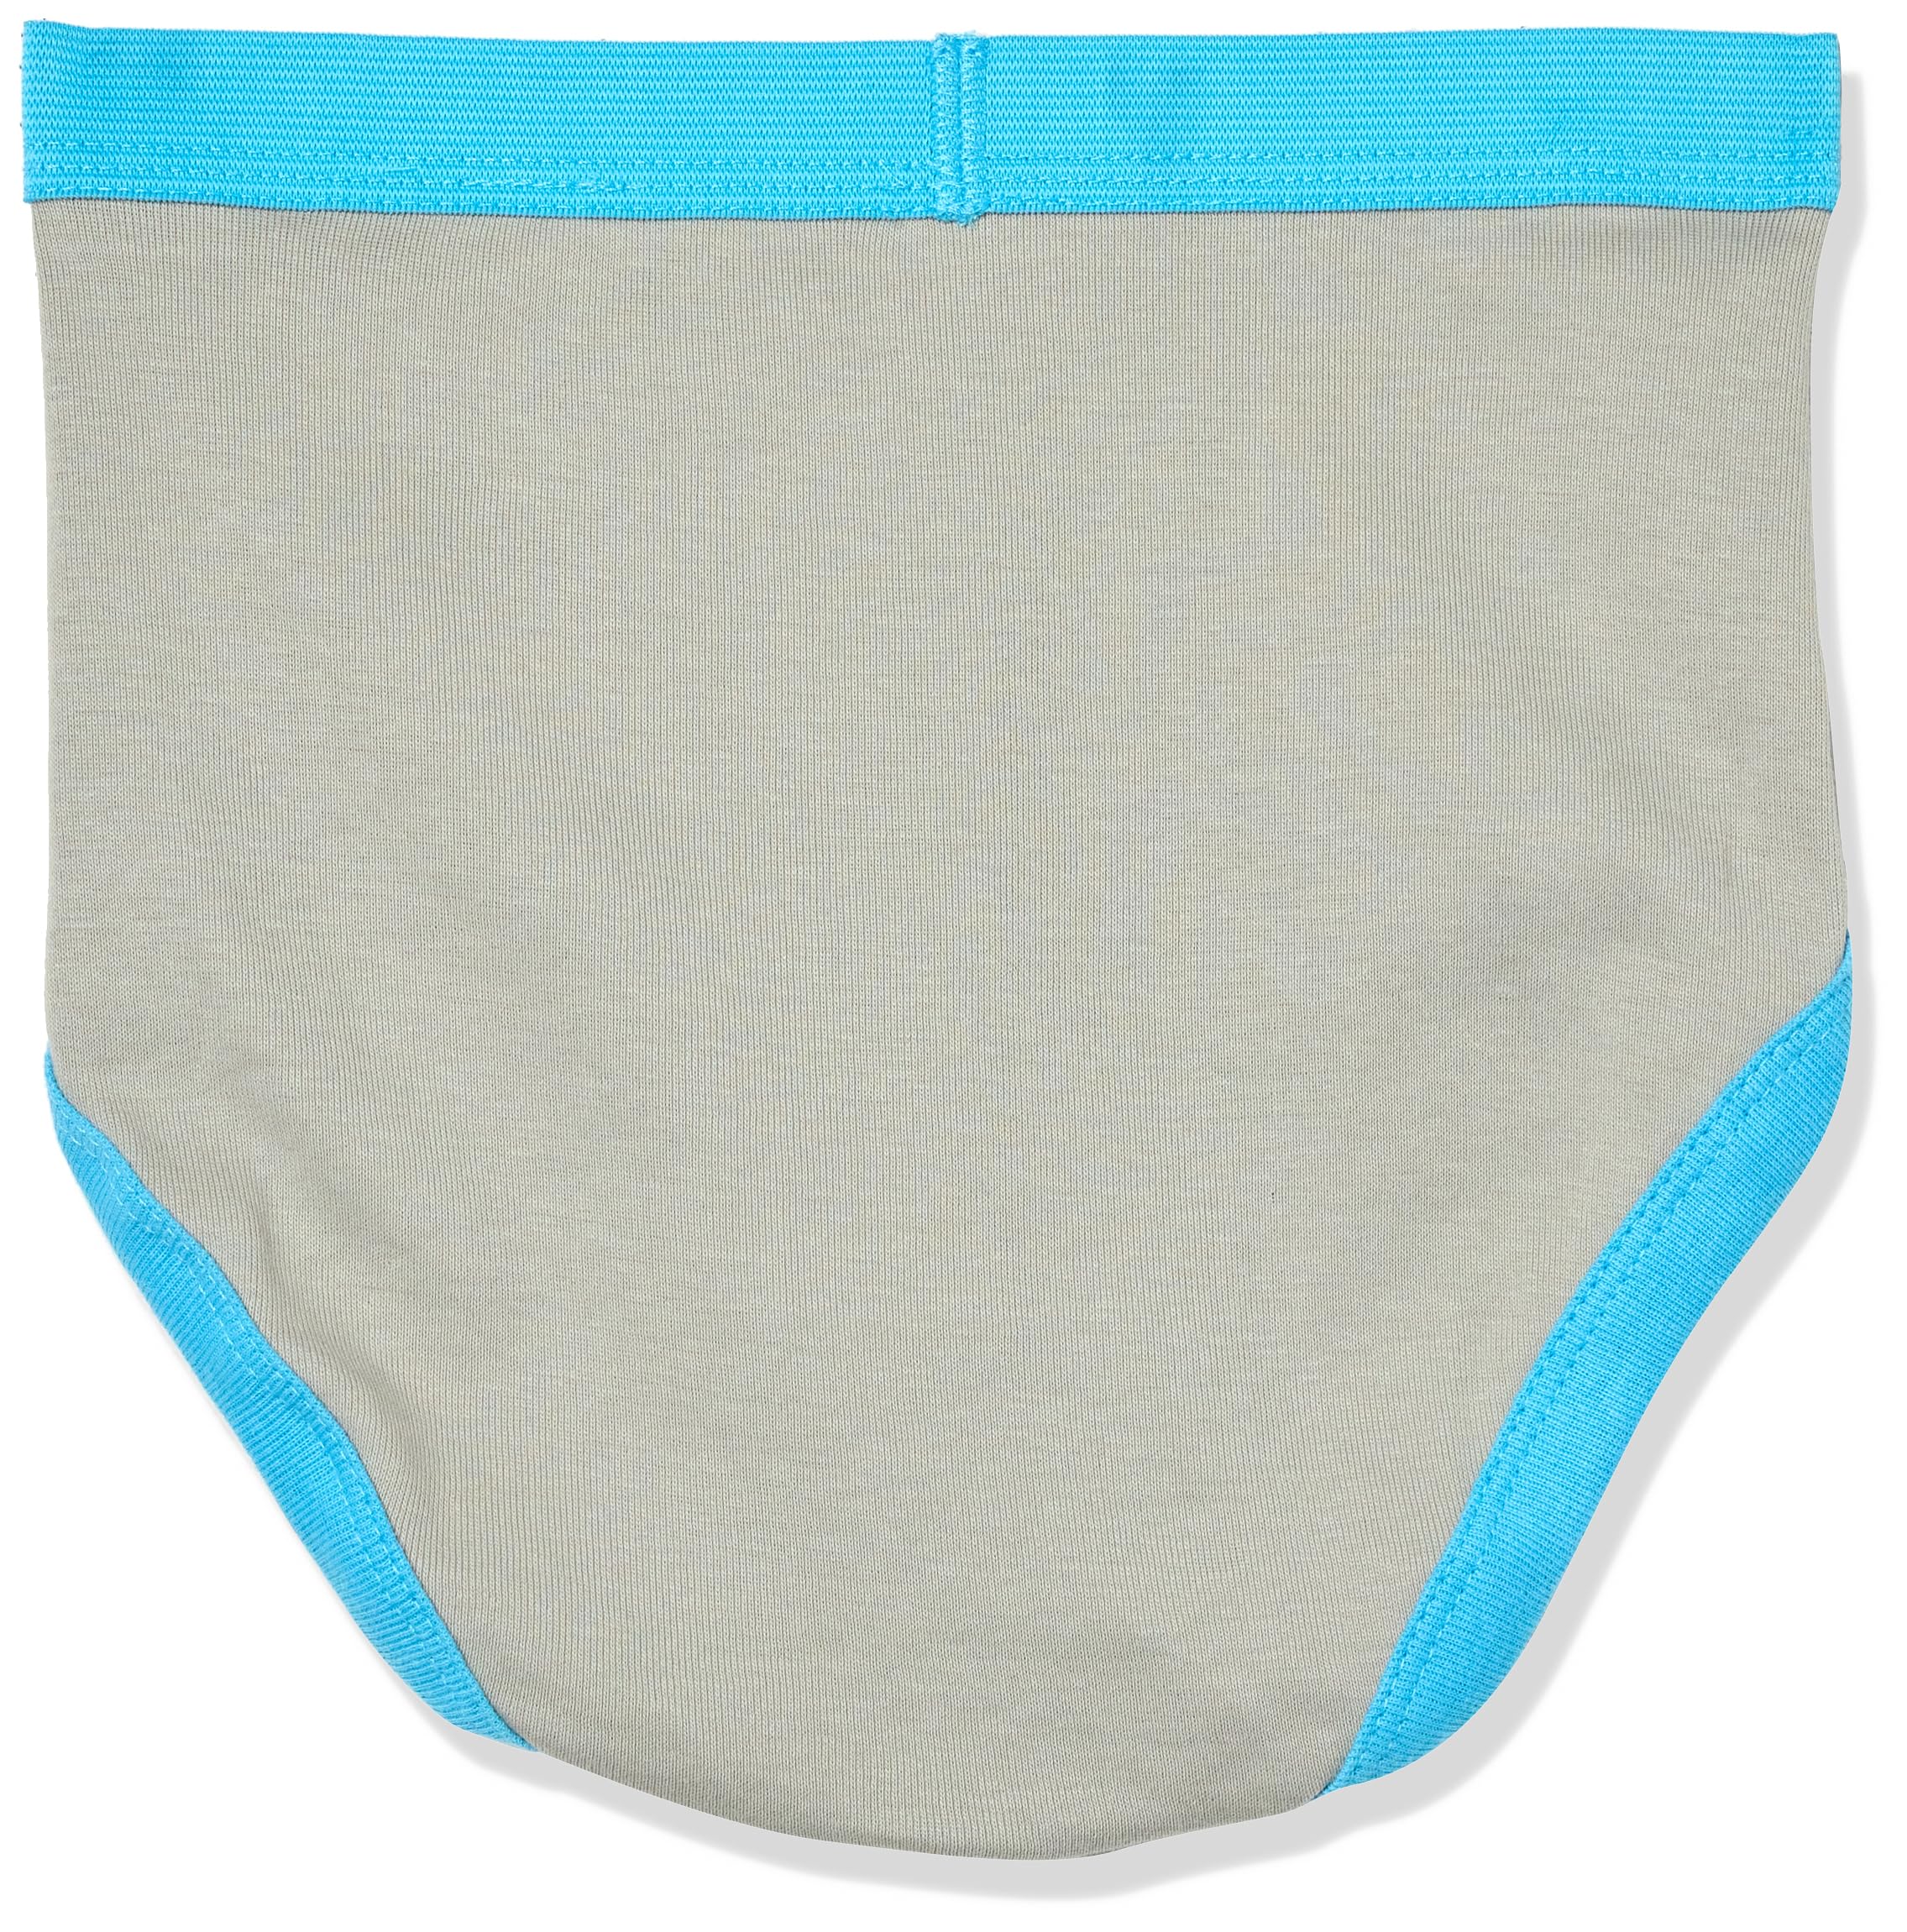 Hot Wheels Boys' Boxerbriefs and Briefs Available in Sizes 2/3t, 4t, 4, 6, 8 and 10